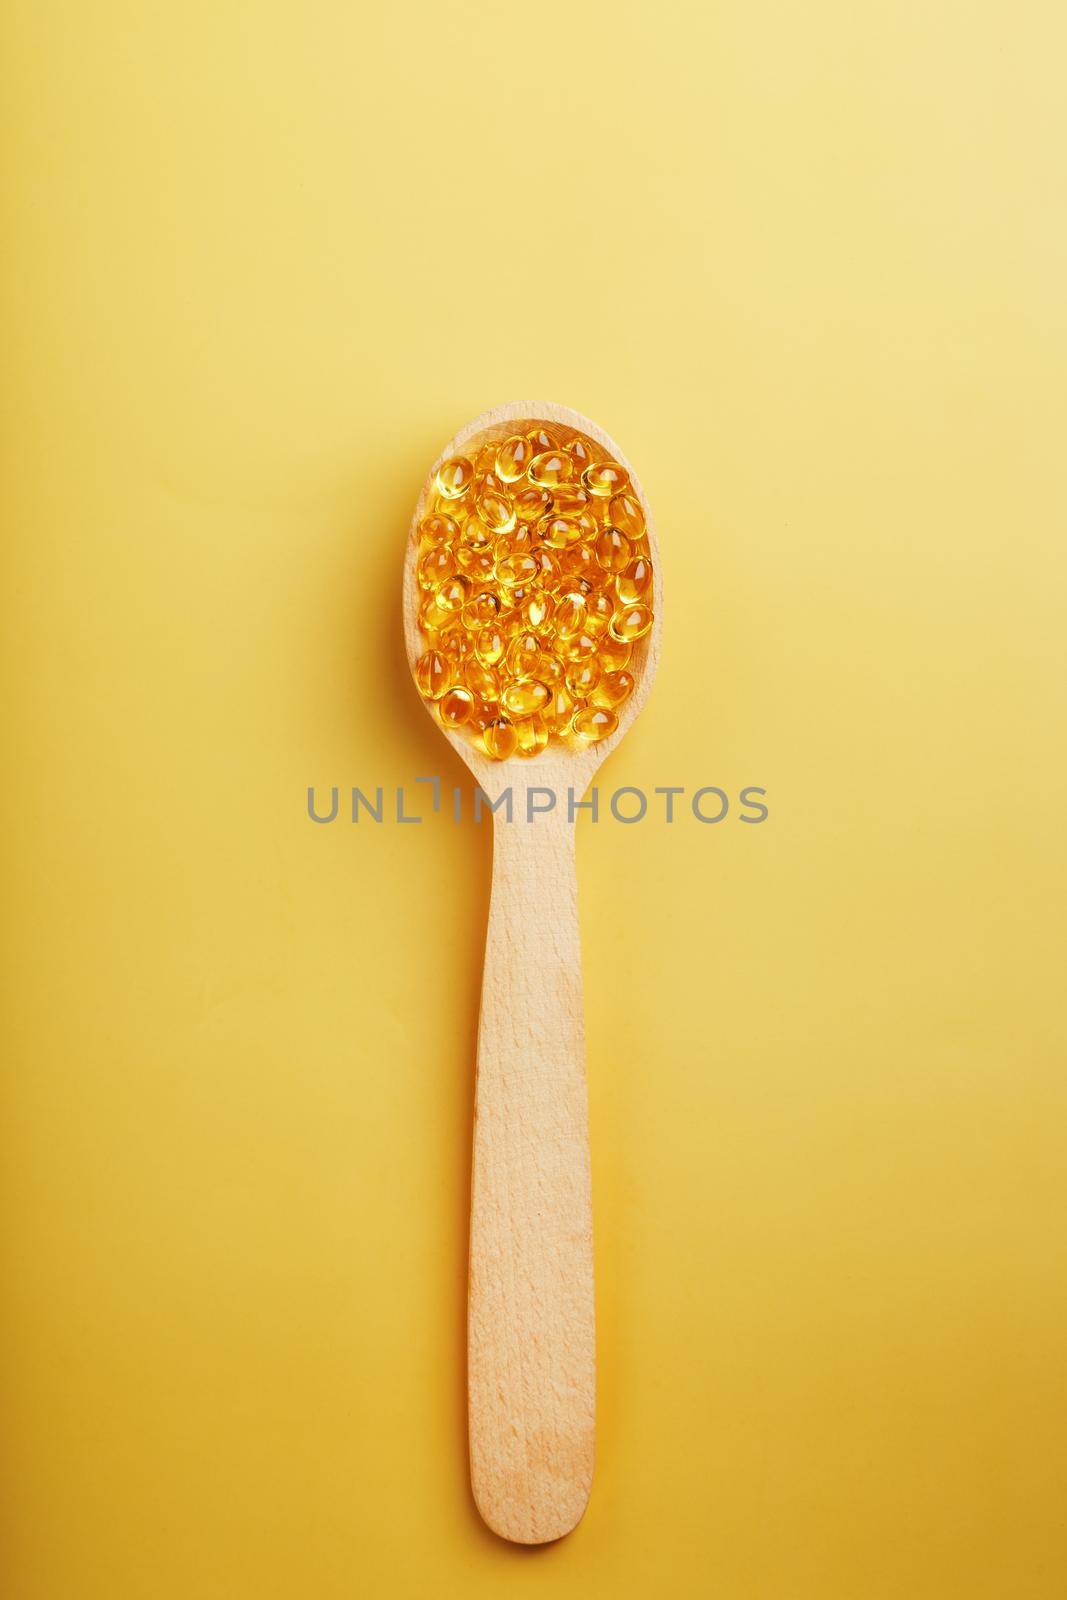 Vitamin D3 Capsules in a spoon with other vitamin D3 capsules around them on a yellow background by AlexGrec